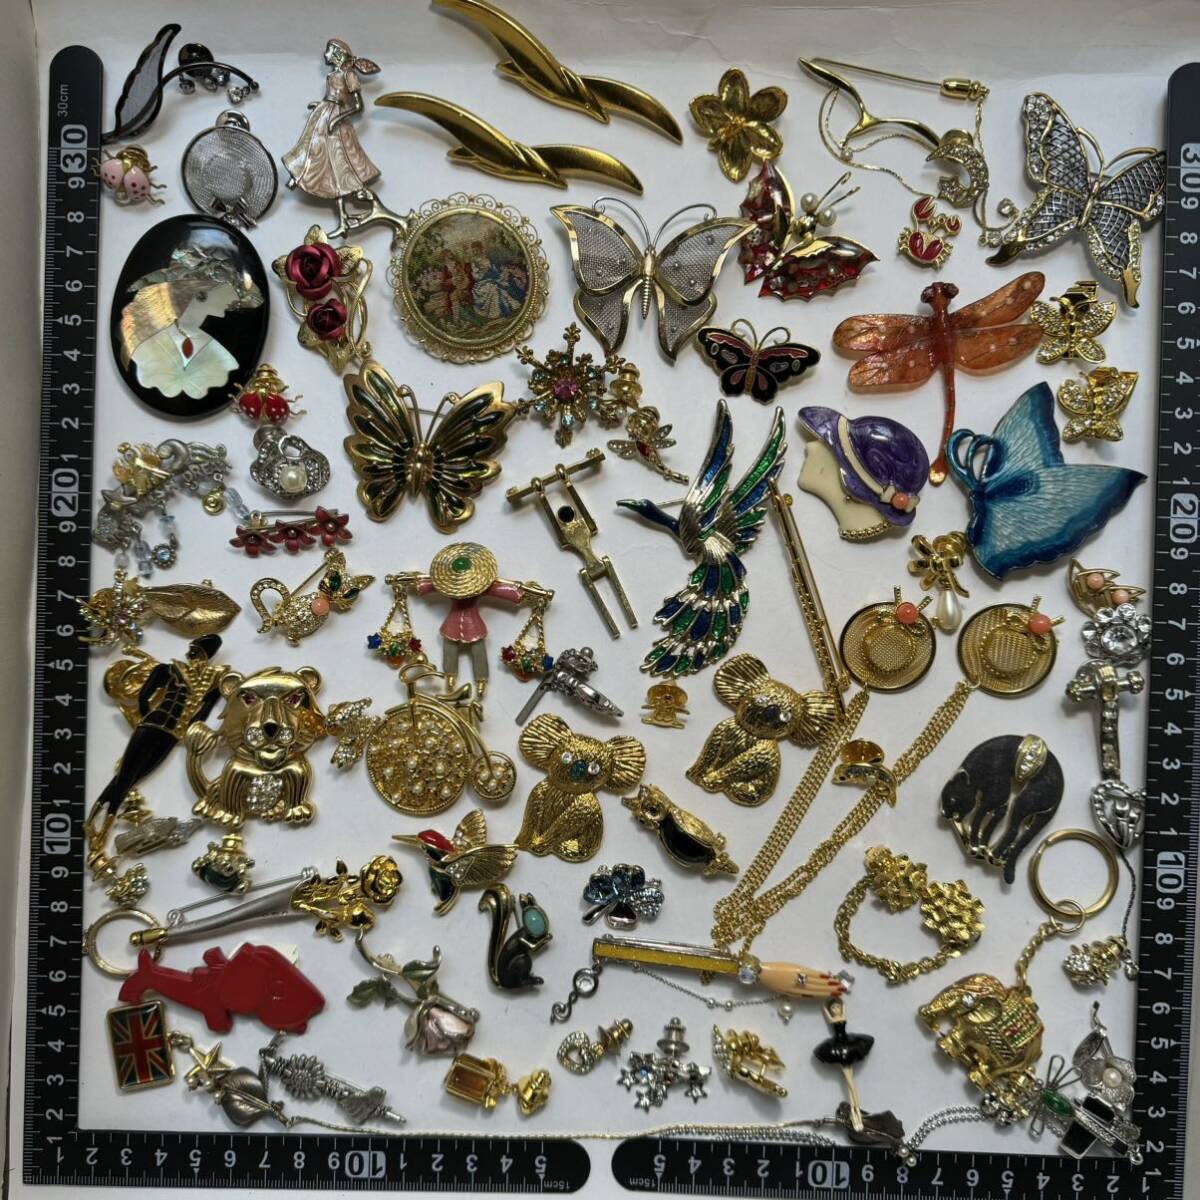  brooch accessory set large amount 80 point together animal dog cat bird . butterfly ....piero pin warehouse storage goods flima